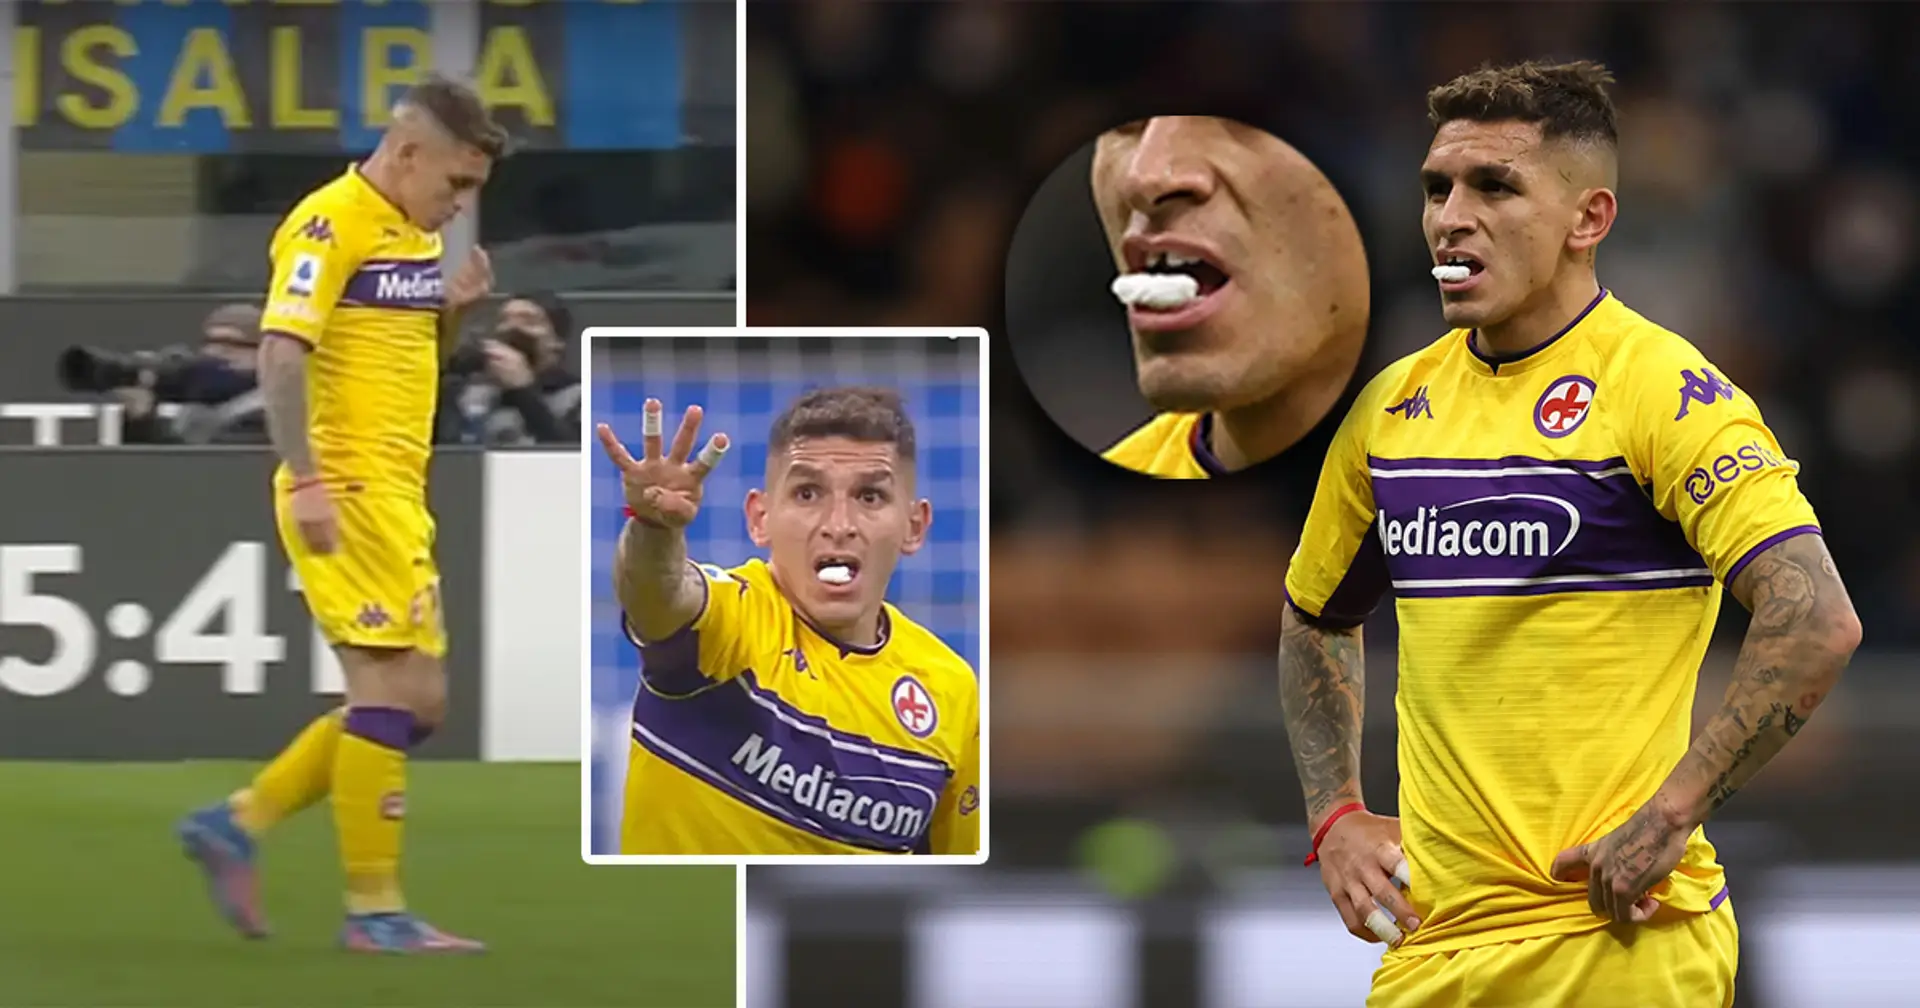 Lucas Torreira lost his tooth yesterday while playing against Inter Milan